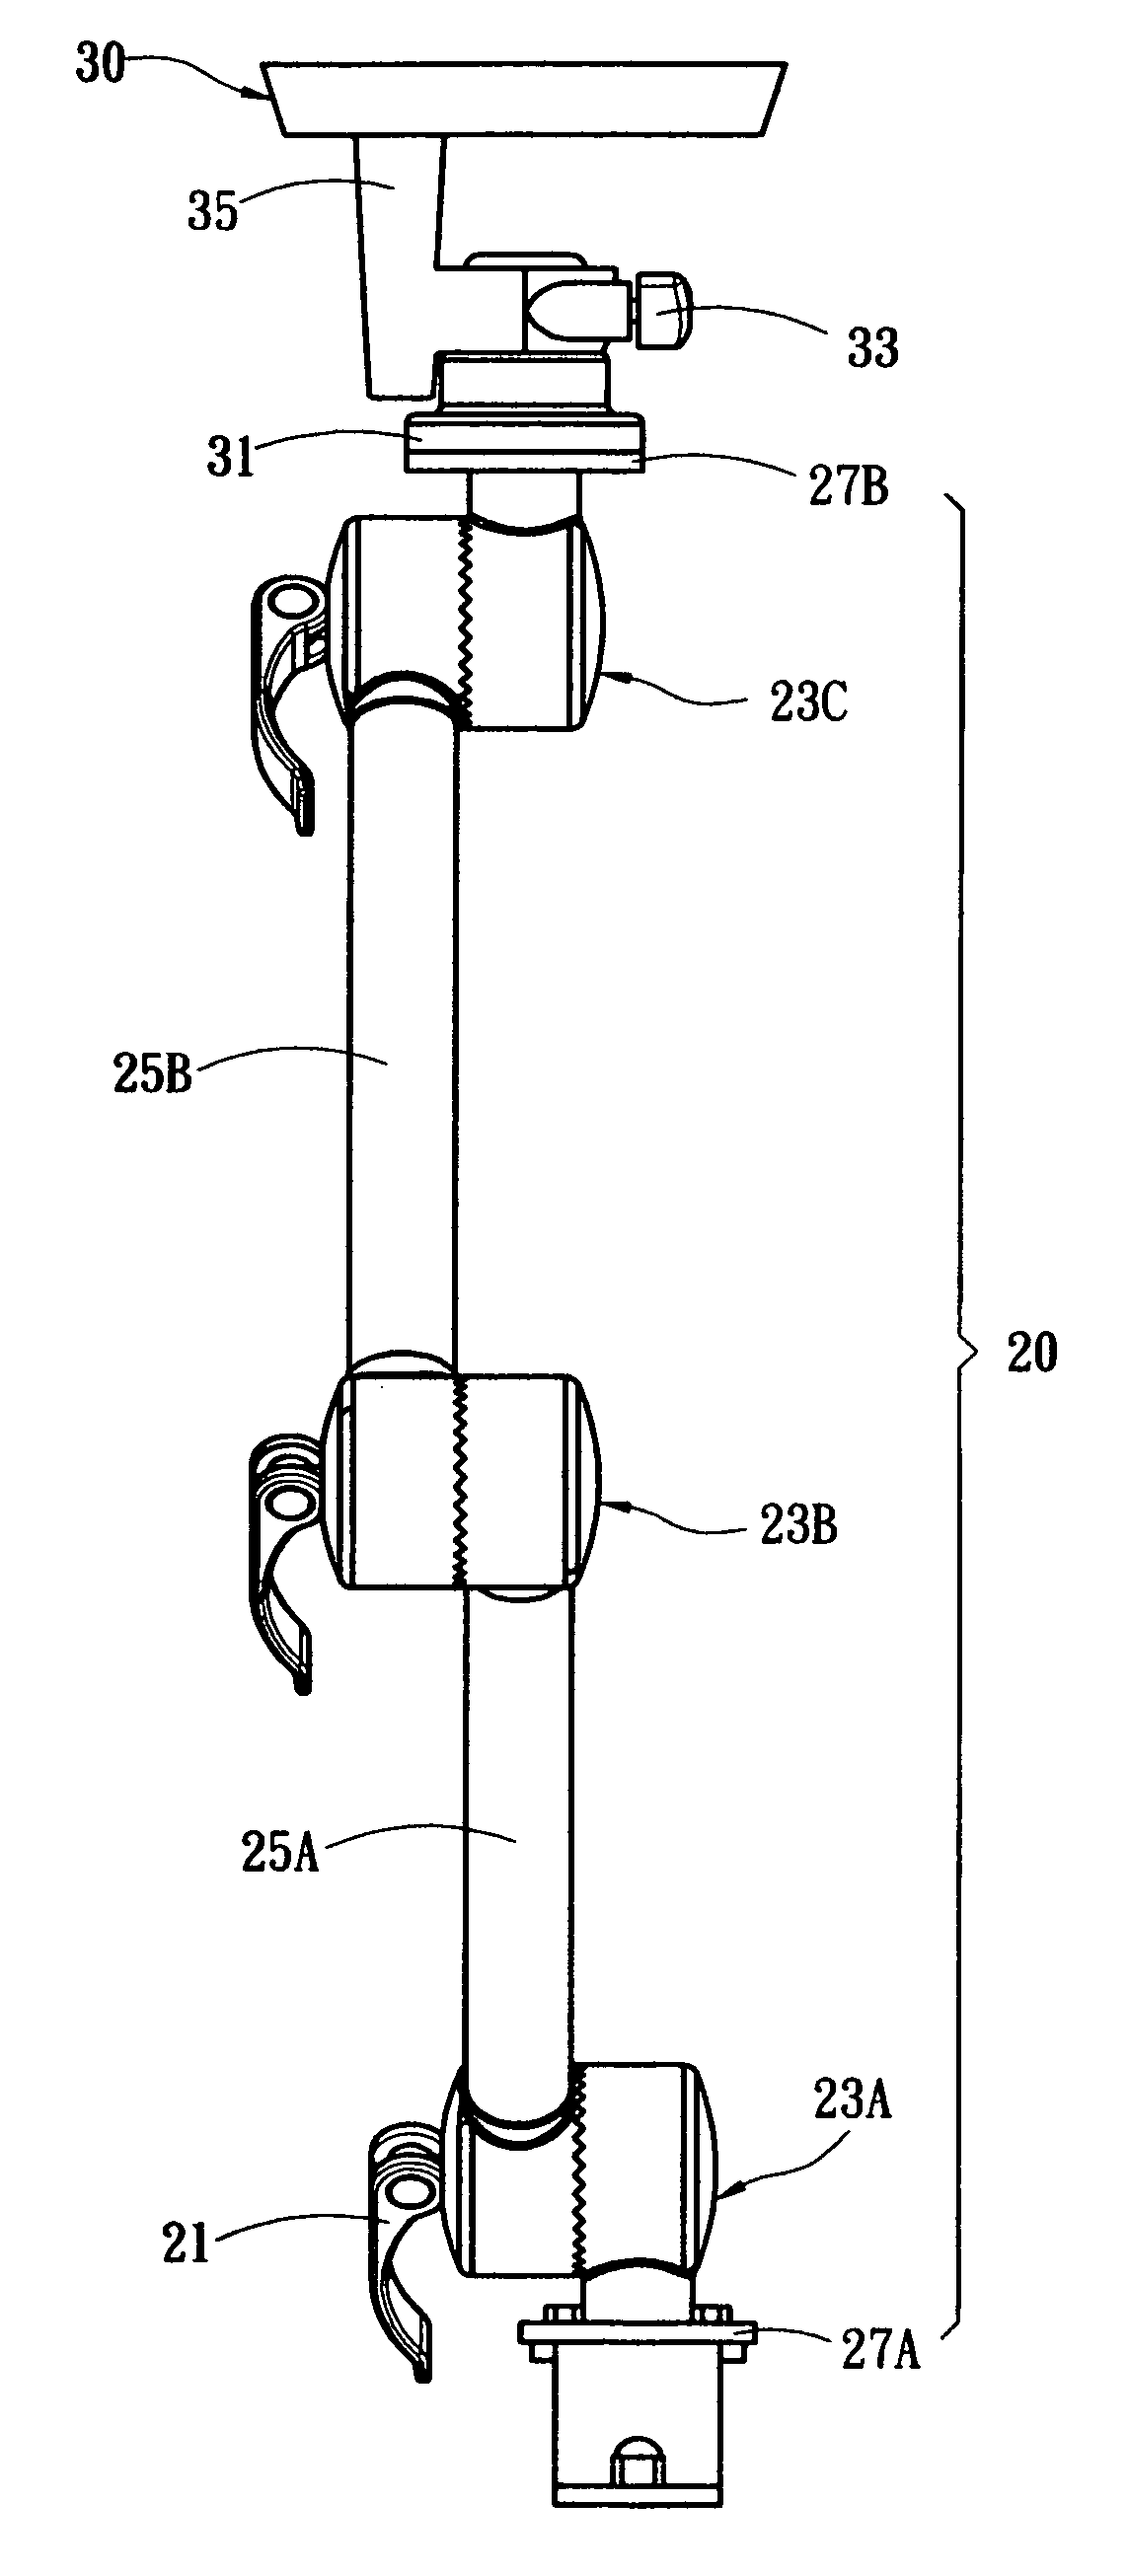 Supporting device for automotive portable electronic instruments